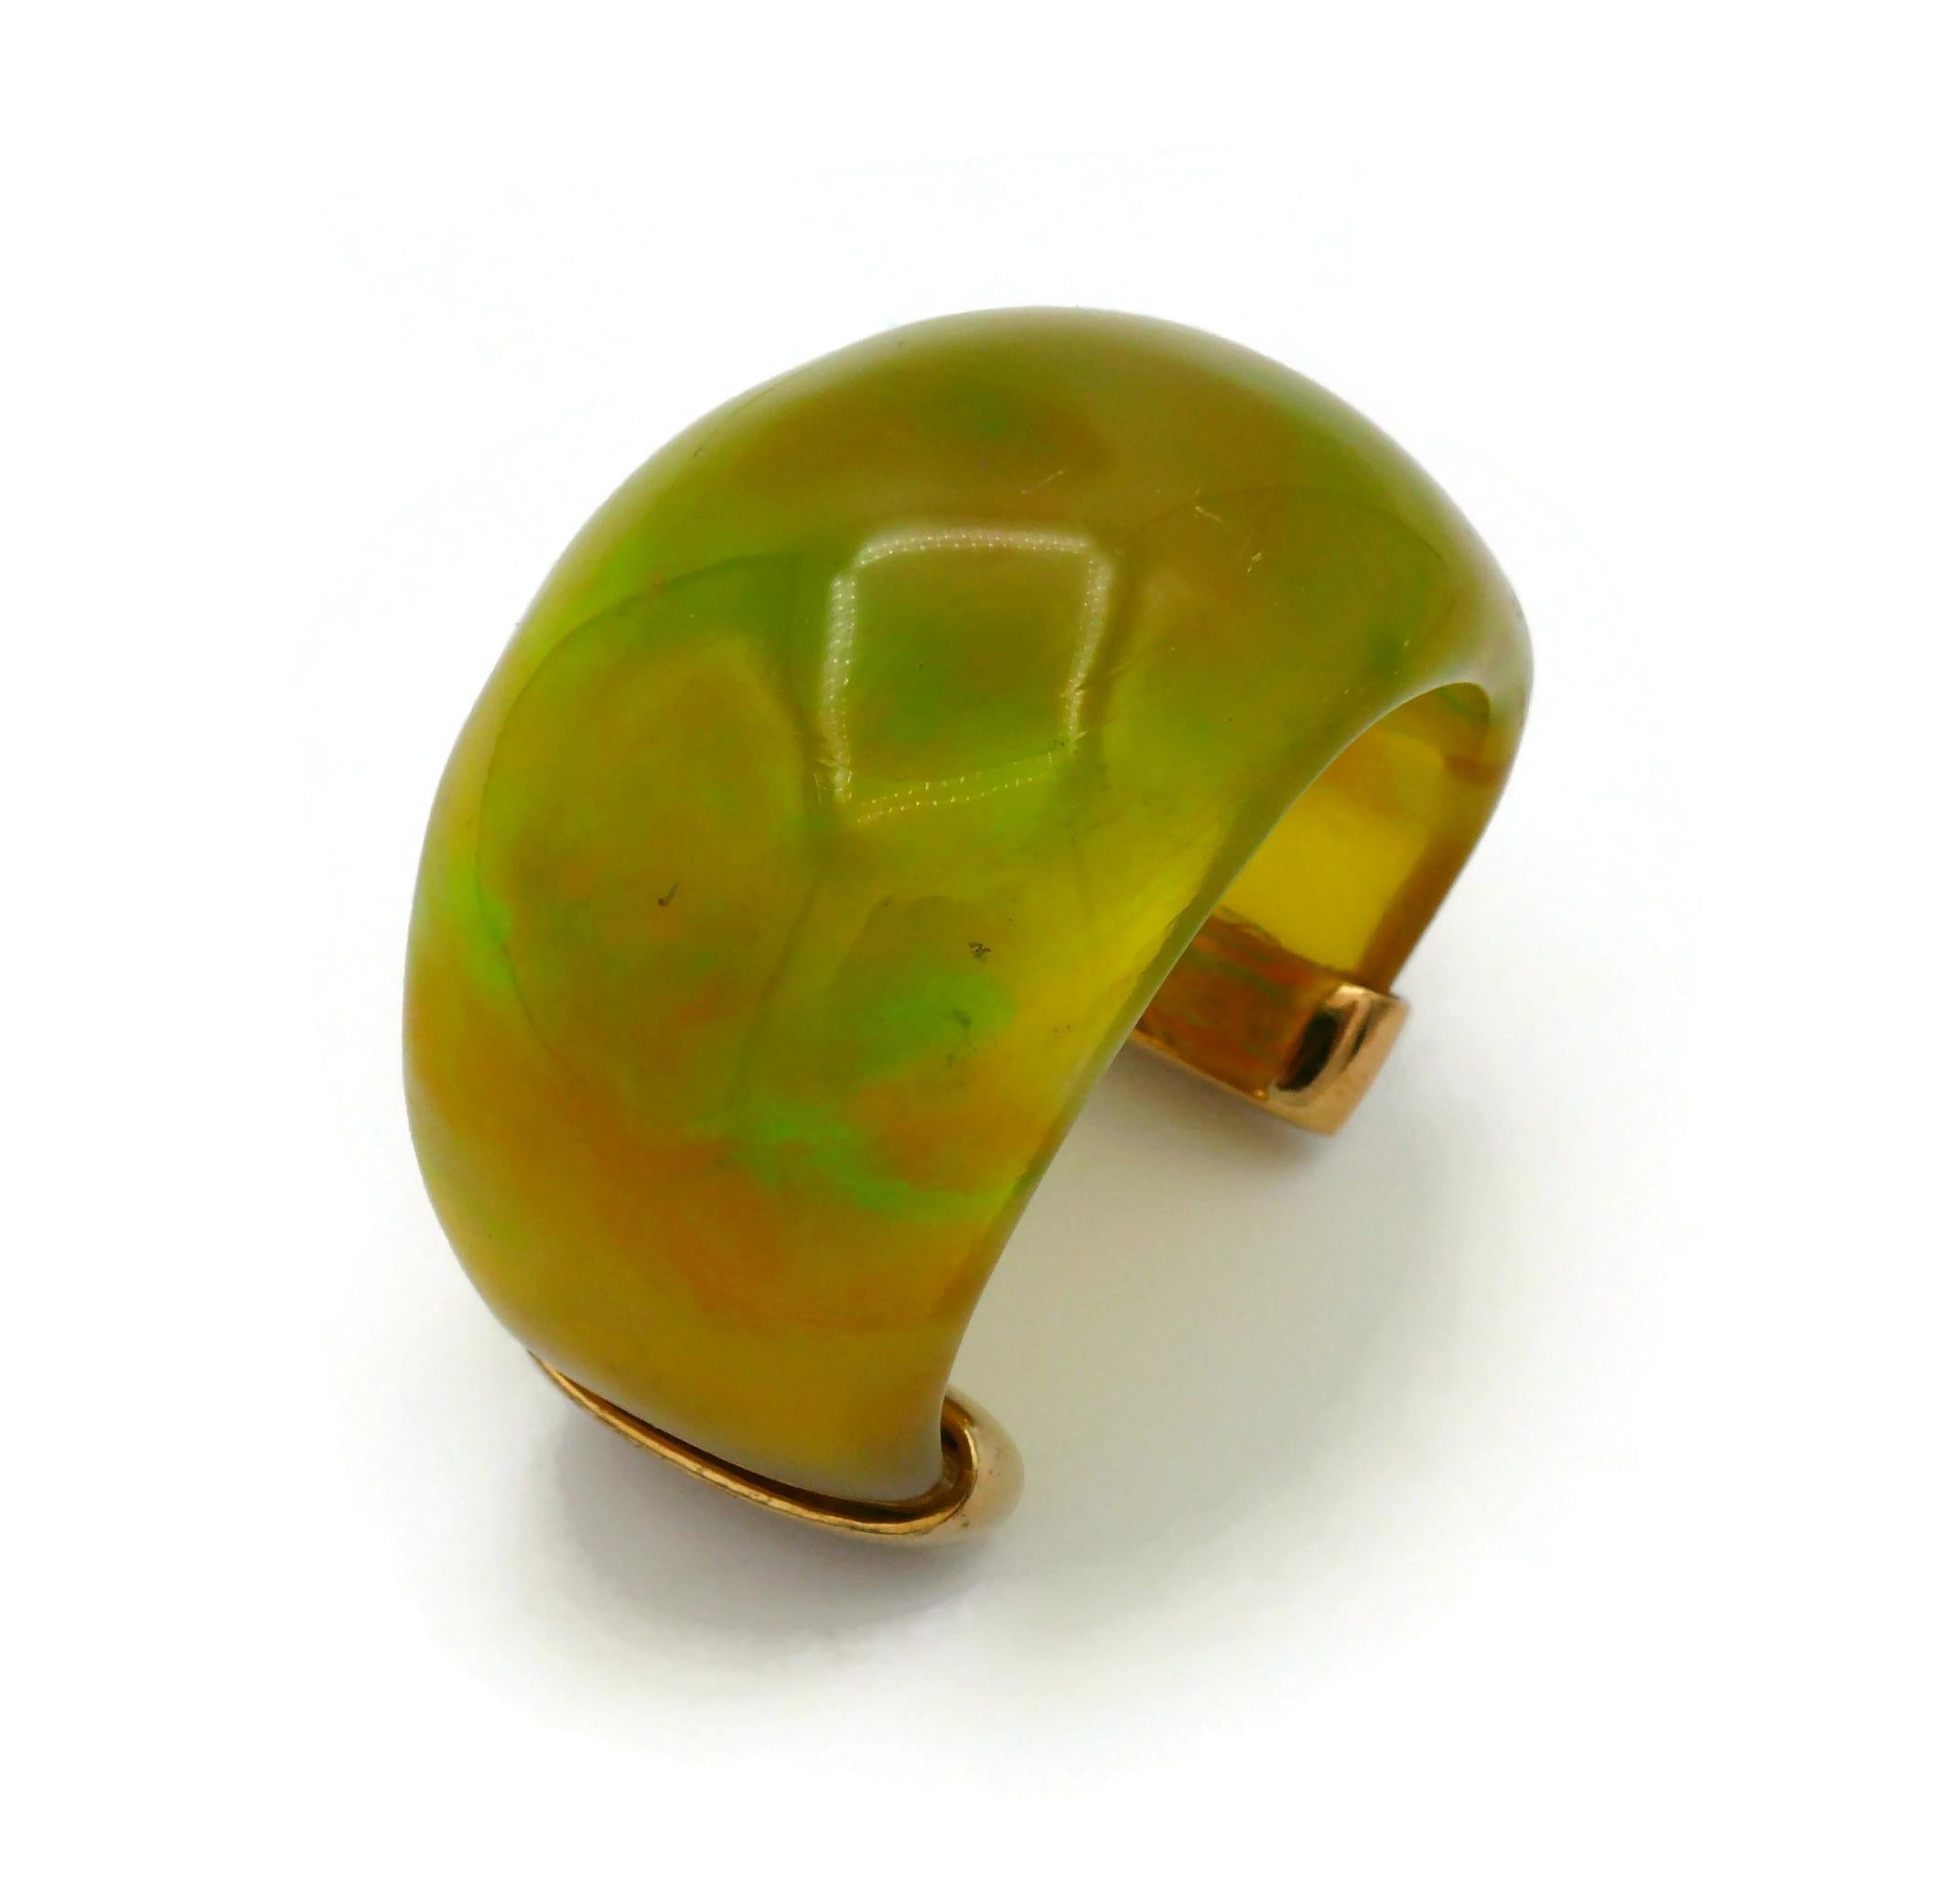 YVES SAINT LAURENT YSL Vintage Yellow Green Marbled Resin Cuff Bracelet For Sale 4